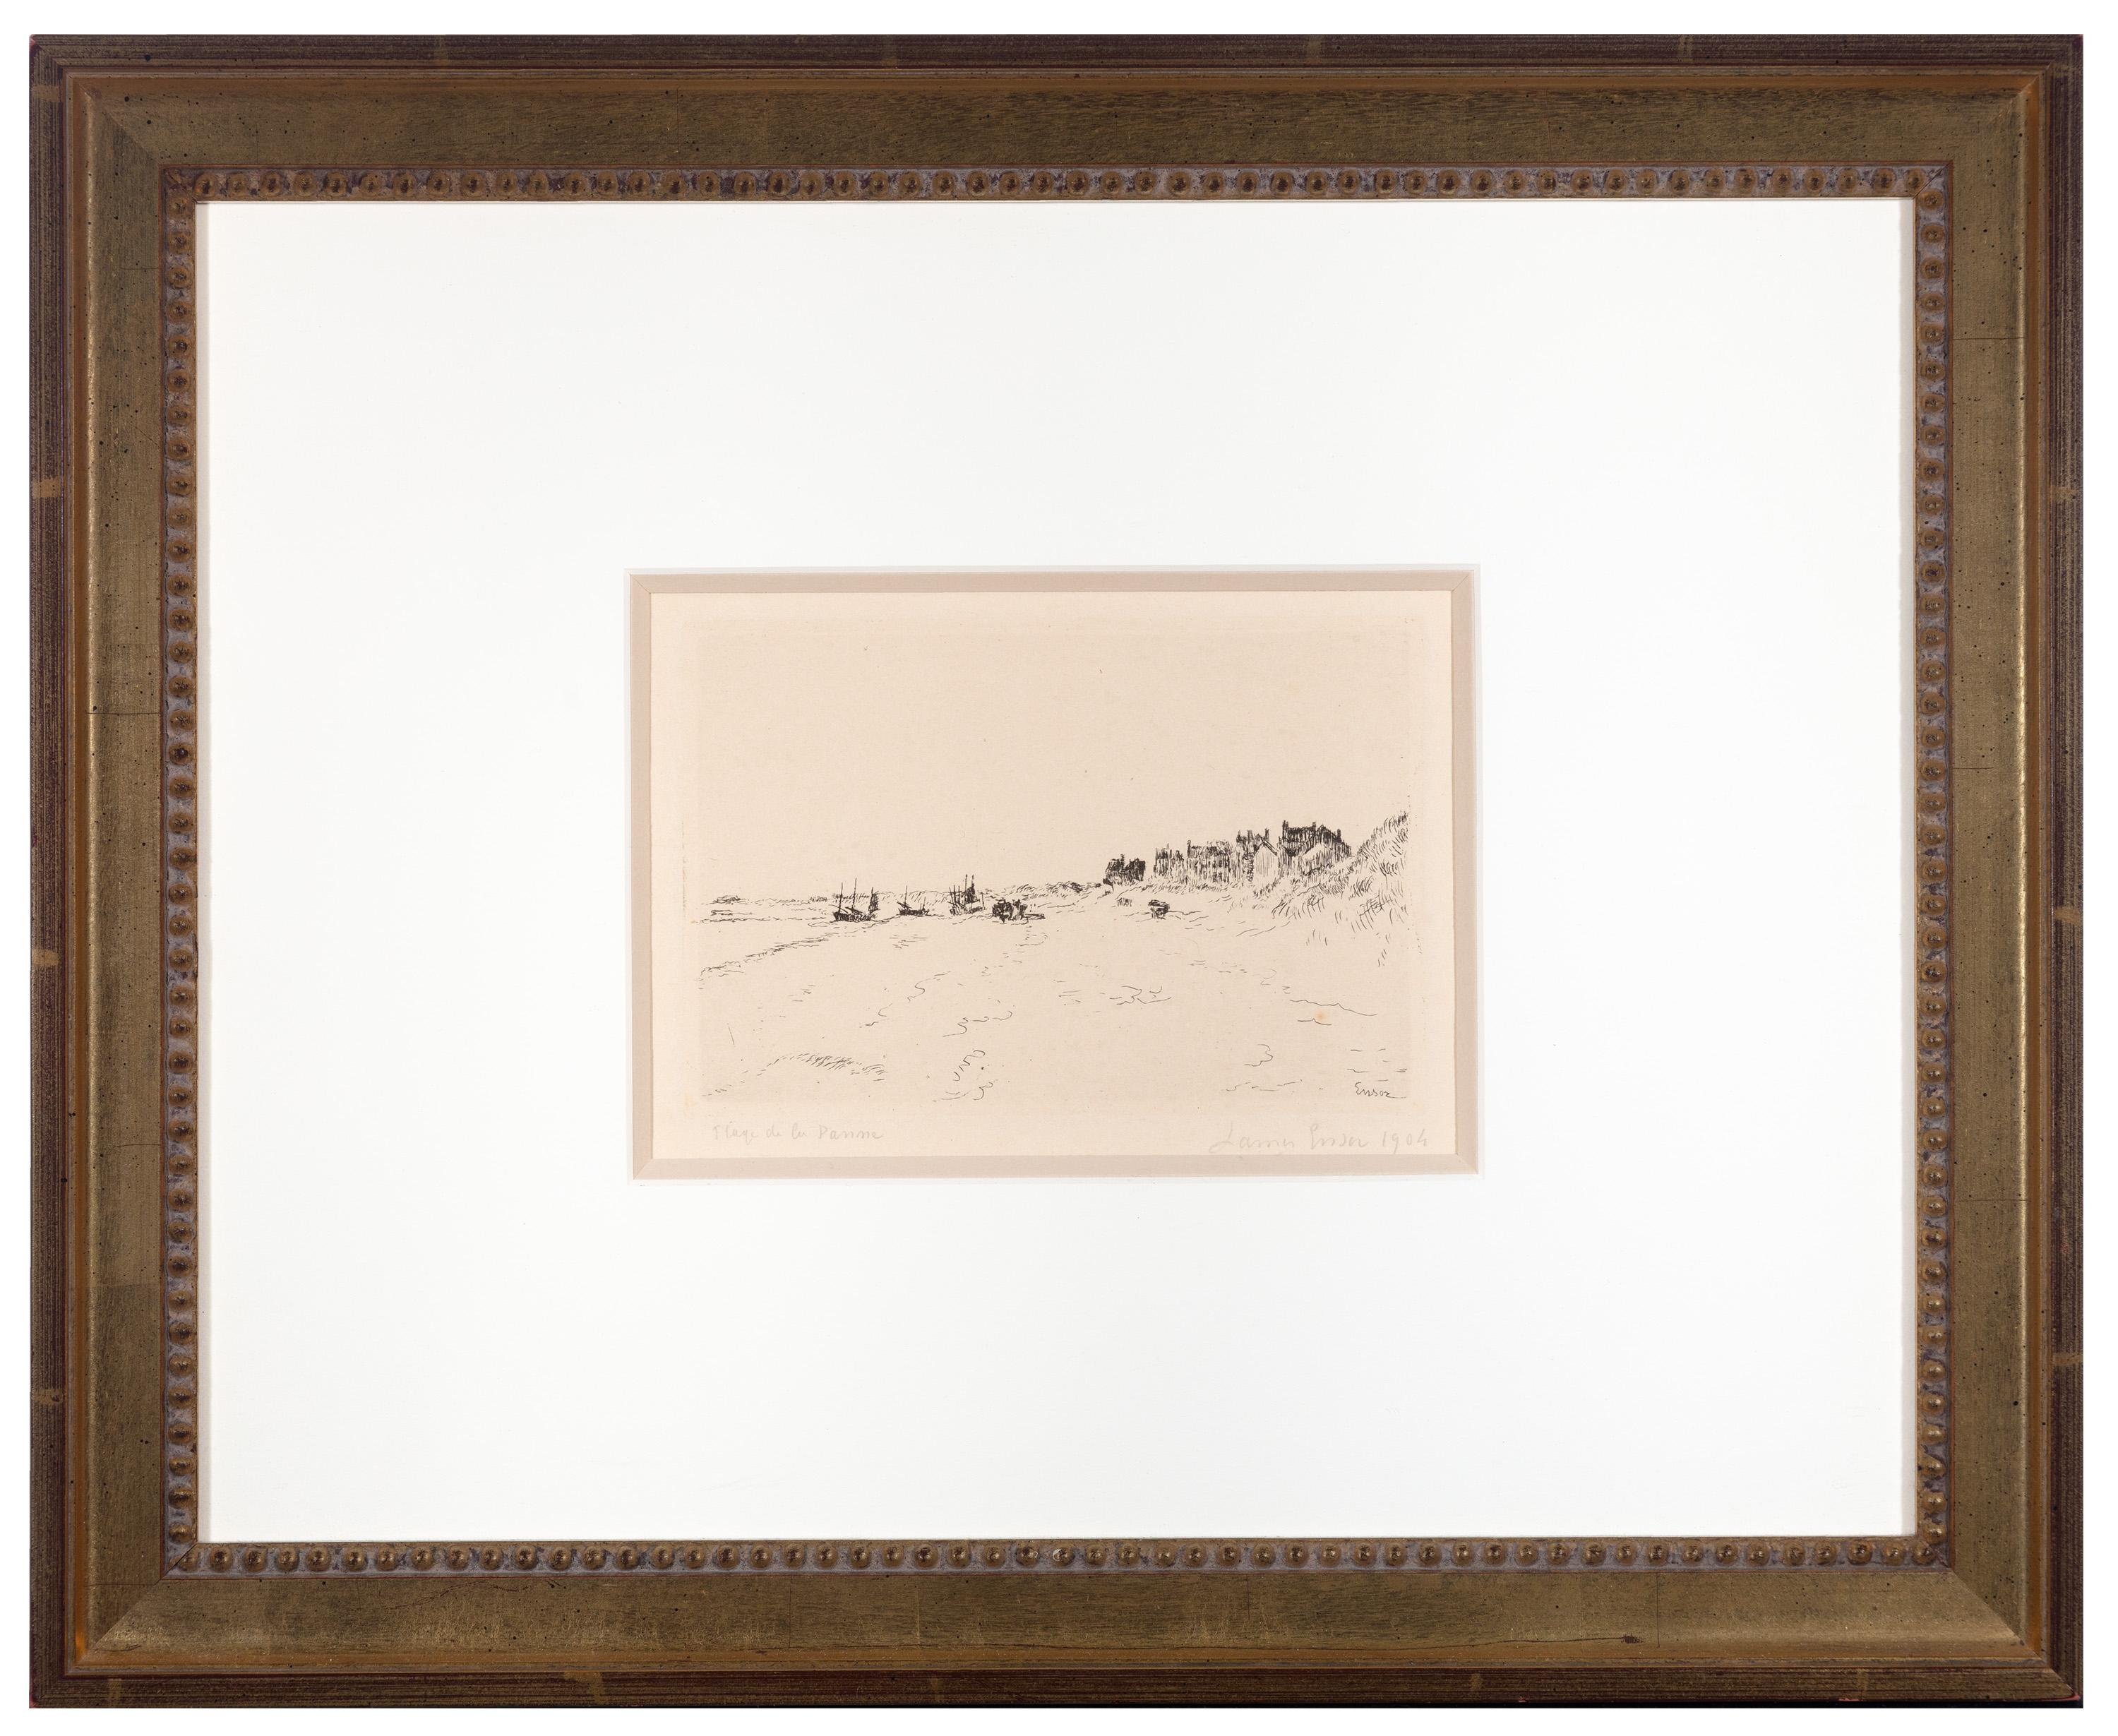 "La Plage de la Panne" is an original etching by James Ensor. The artist signed the piece in plate in the lower right and signed, titled, and dated it below the plate in pencil. This piece depicts a beach with distant shored boats and houses. 

4" x